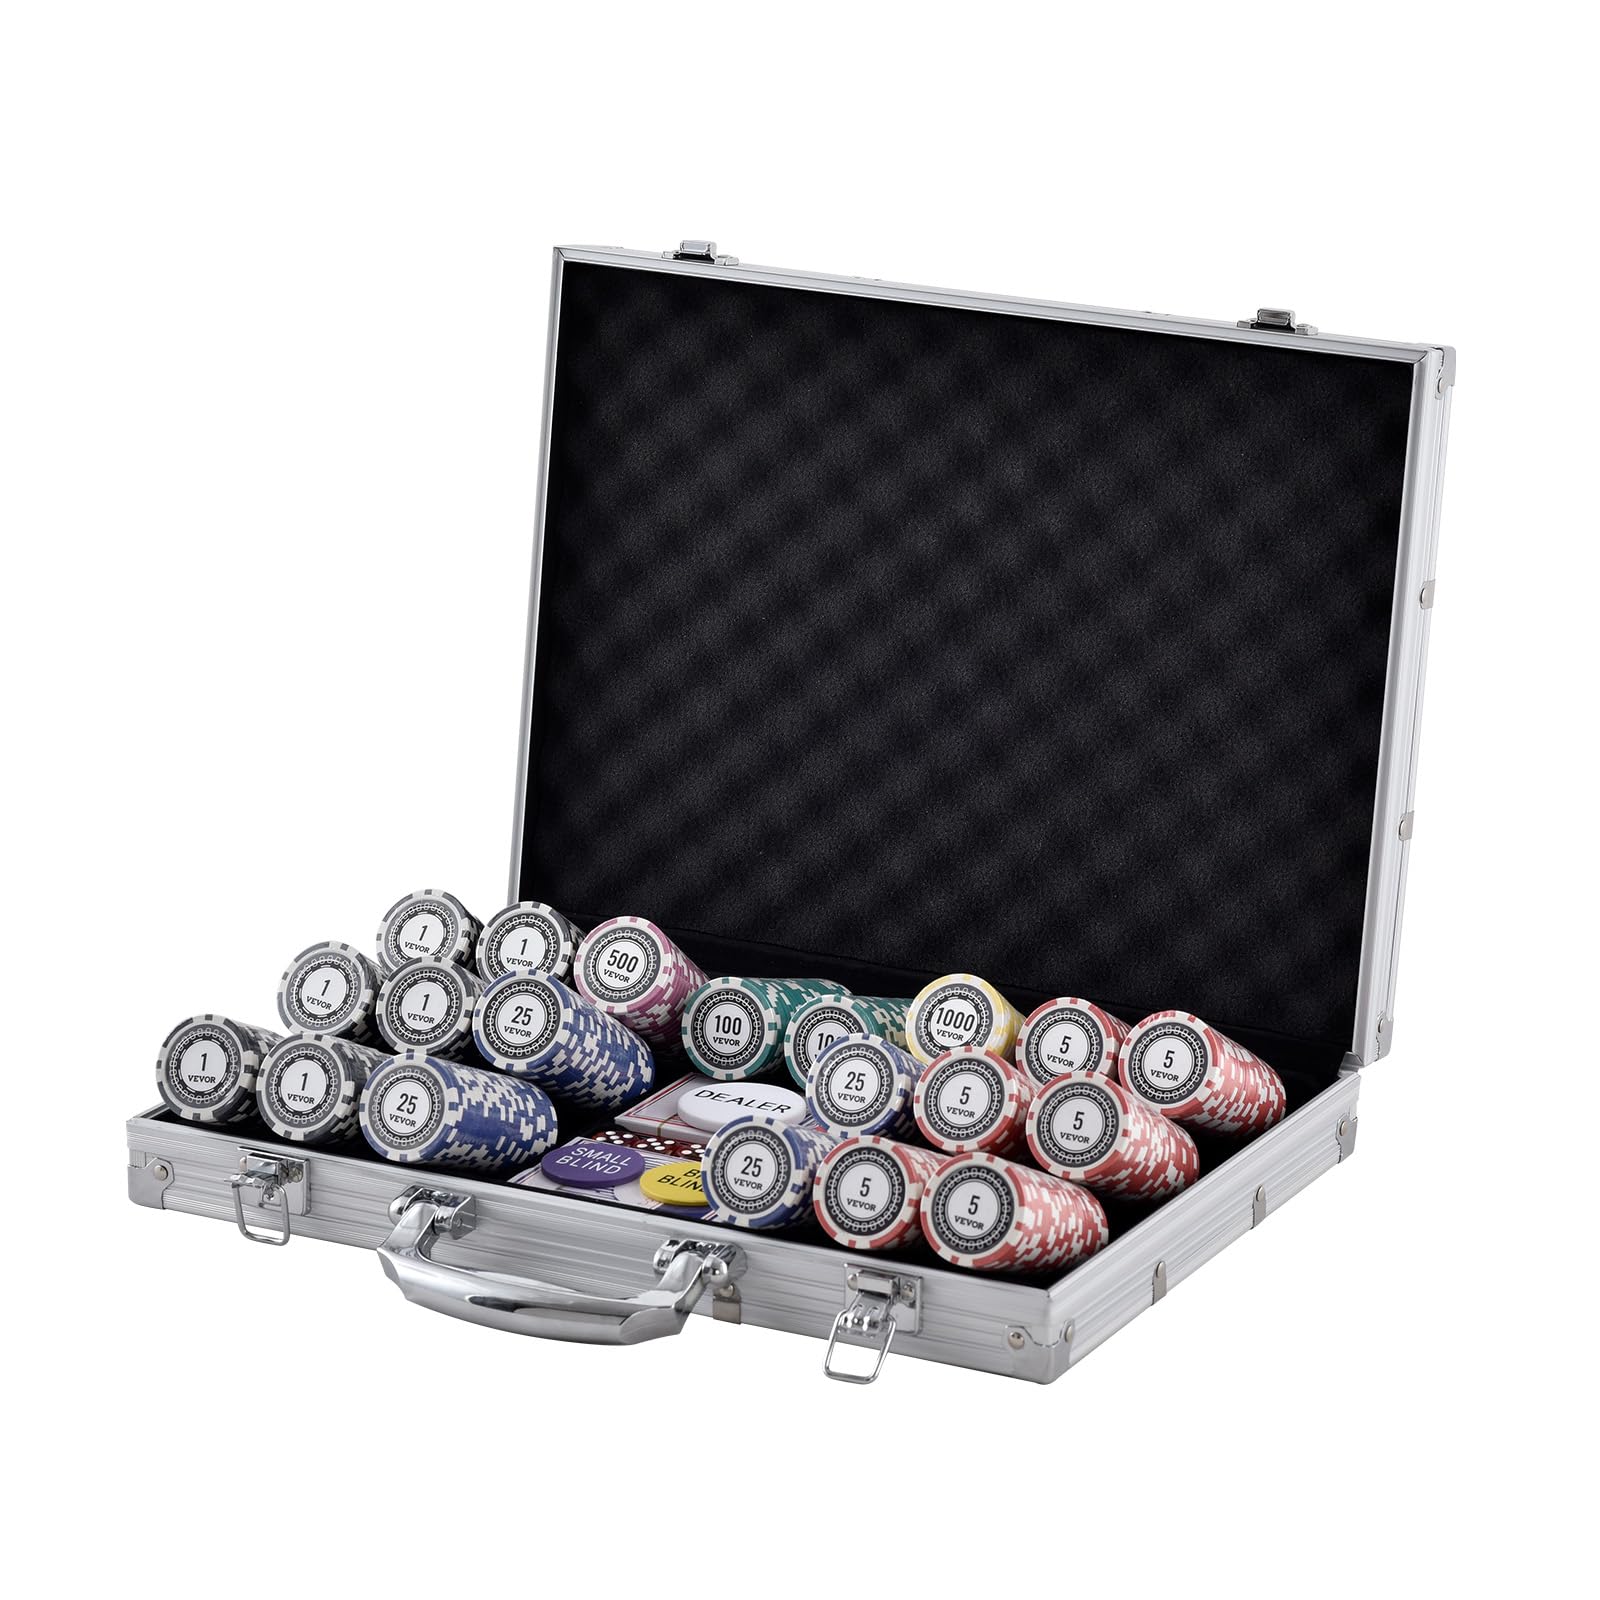 VEVOR Poker Chip Set, 500-Piece Poker Set, Complete Poker Playing Game Set with Aluminum Carrying Case, 11.5 Gram Casino Chips, Cards, Buttons and Dices, for Texas Hold'em, Blackjack, Gambling